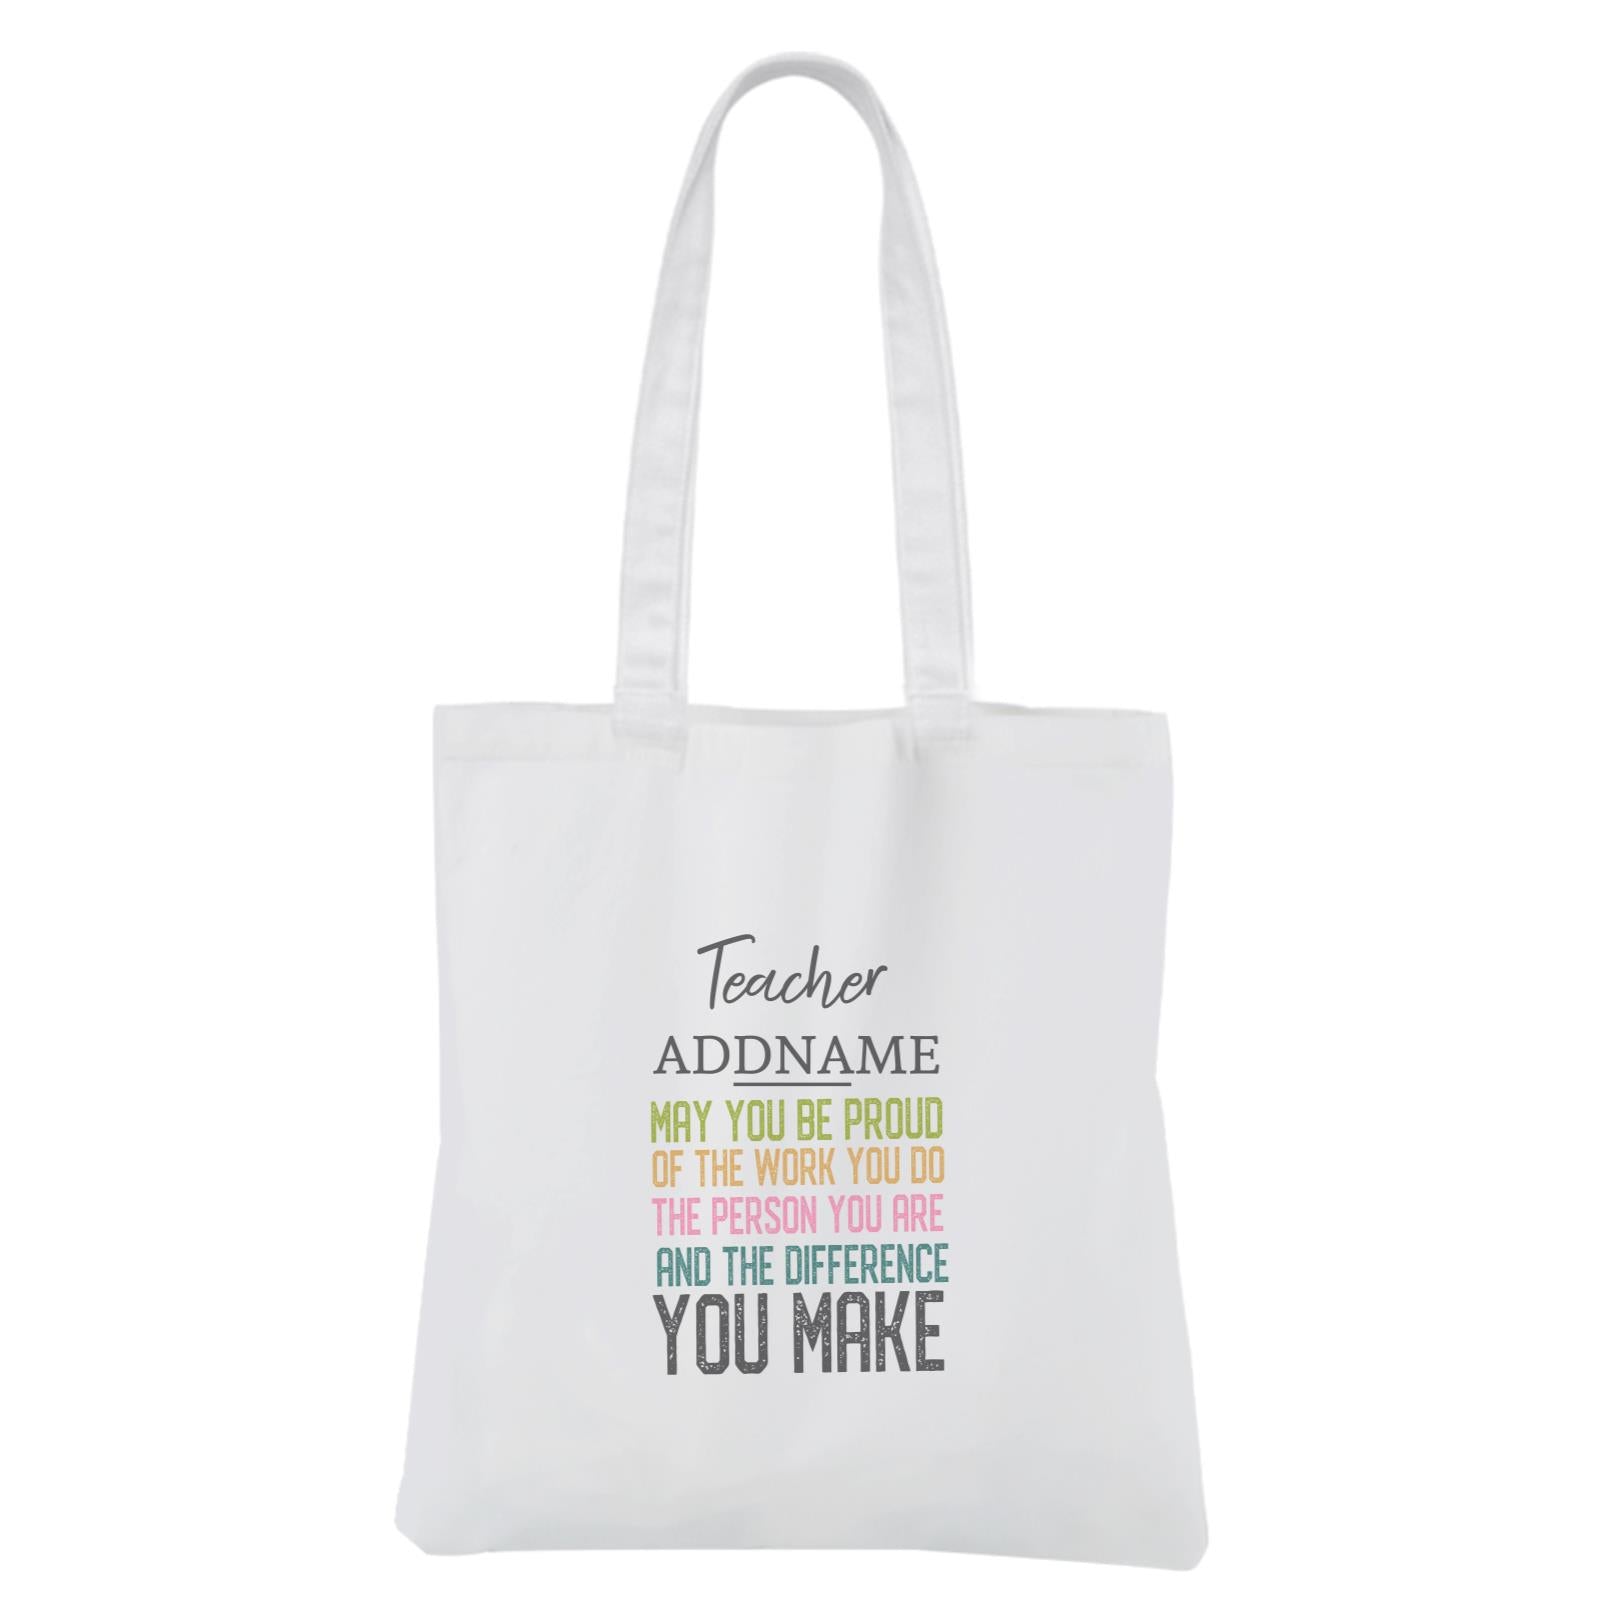 Teacher Addname May You Be Proud And Difference You Make White Canvas Bag